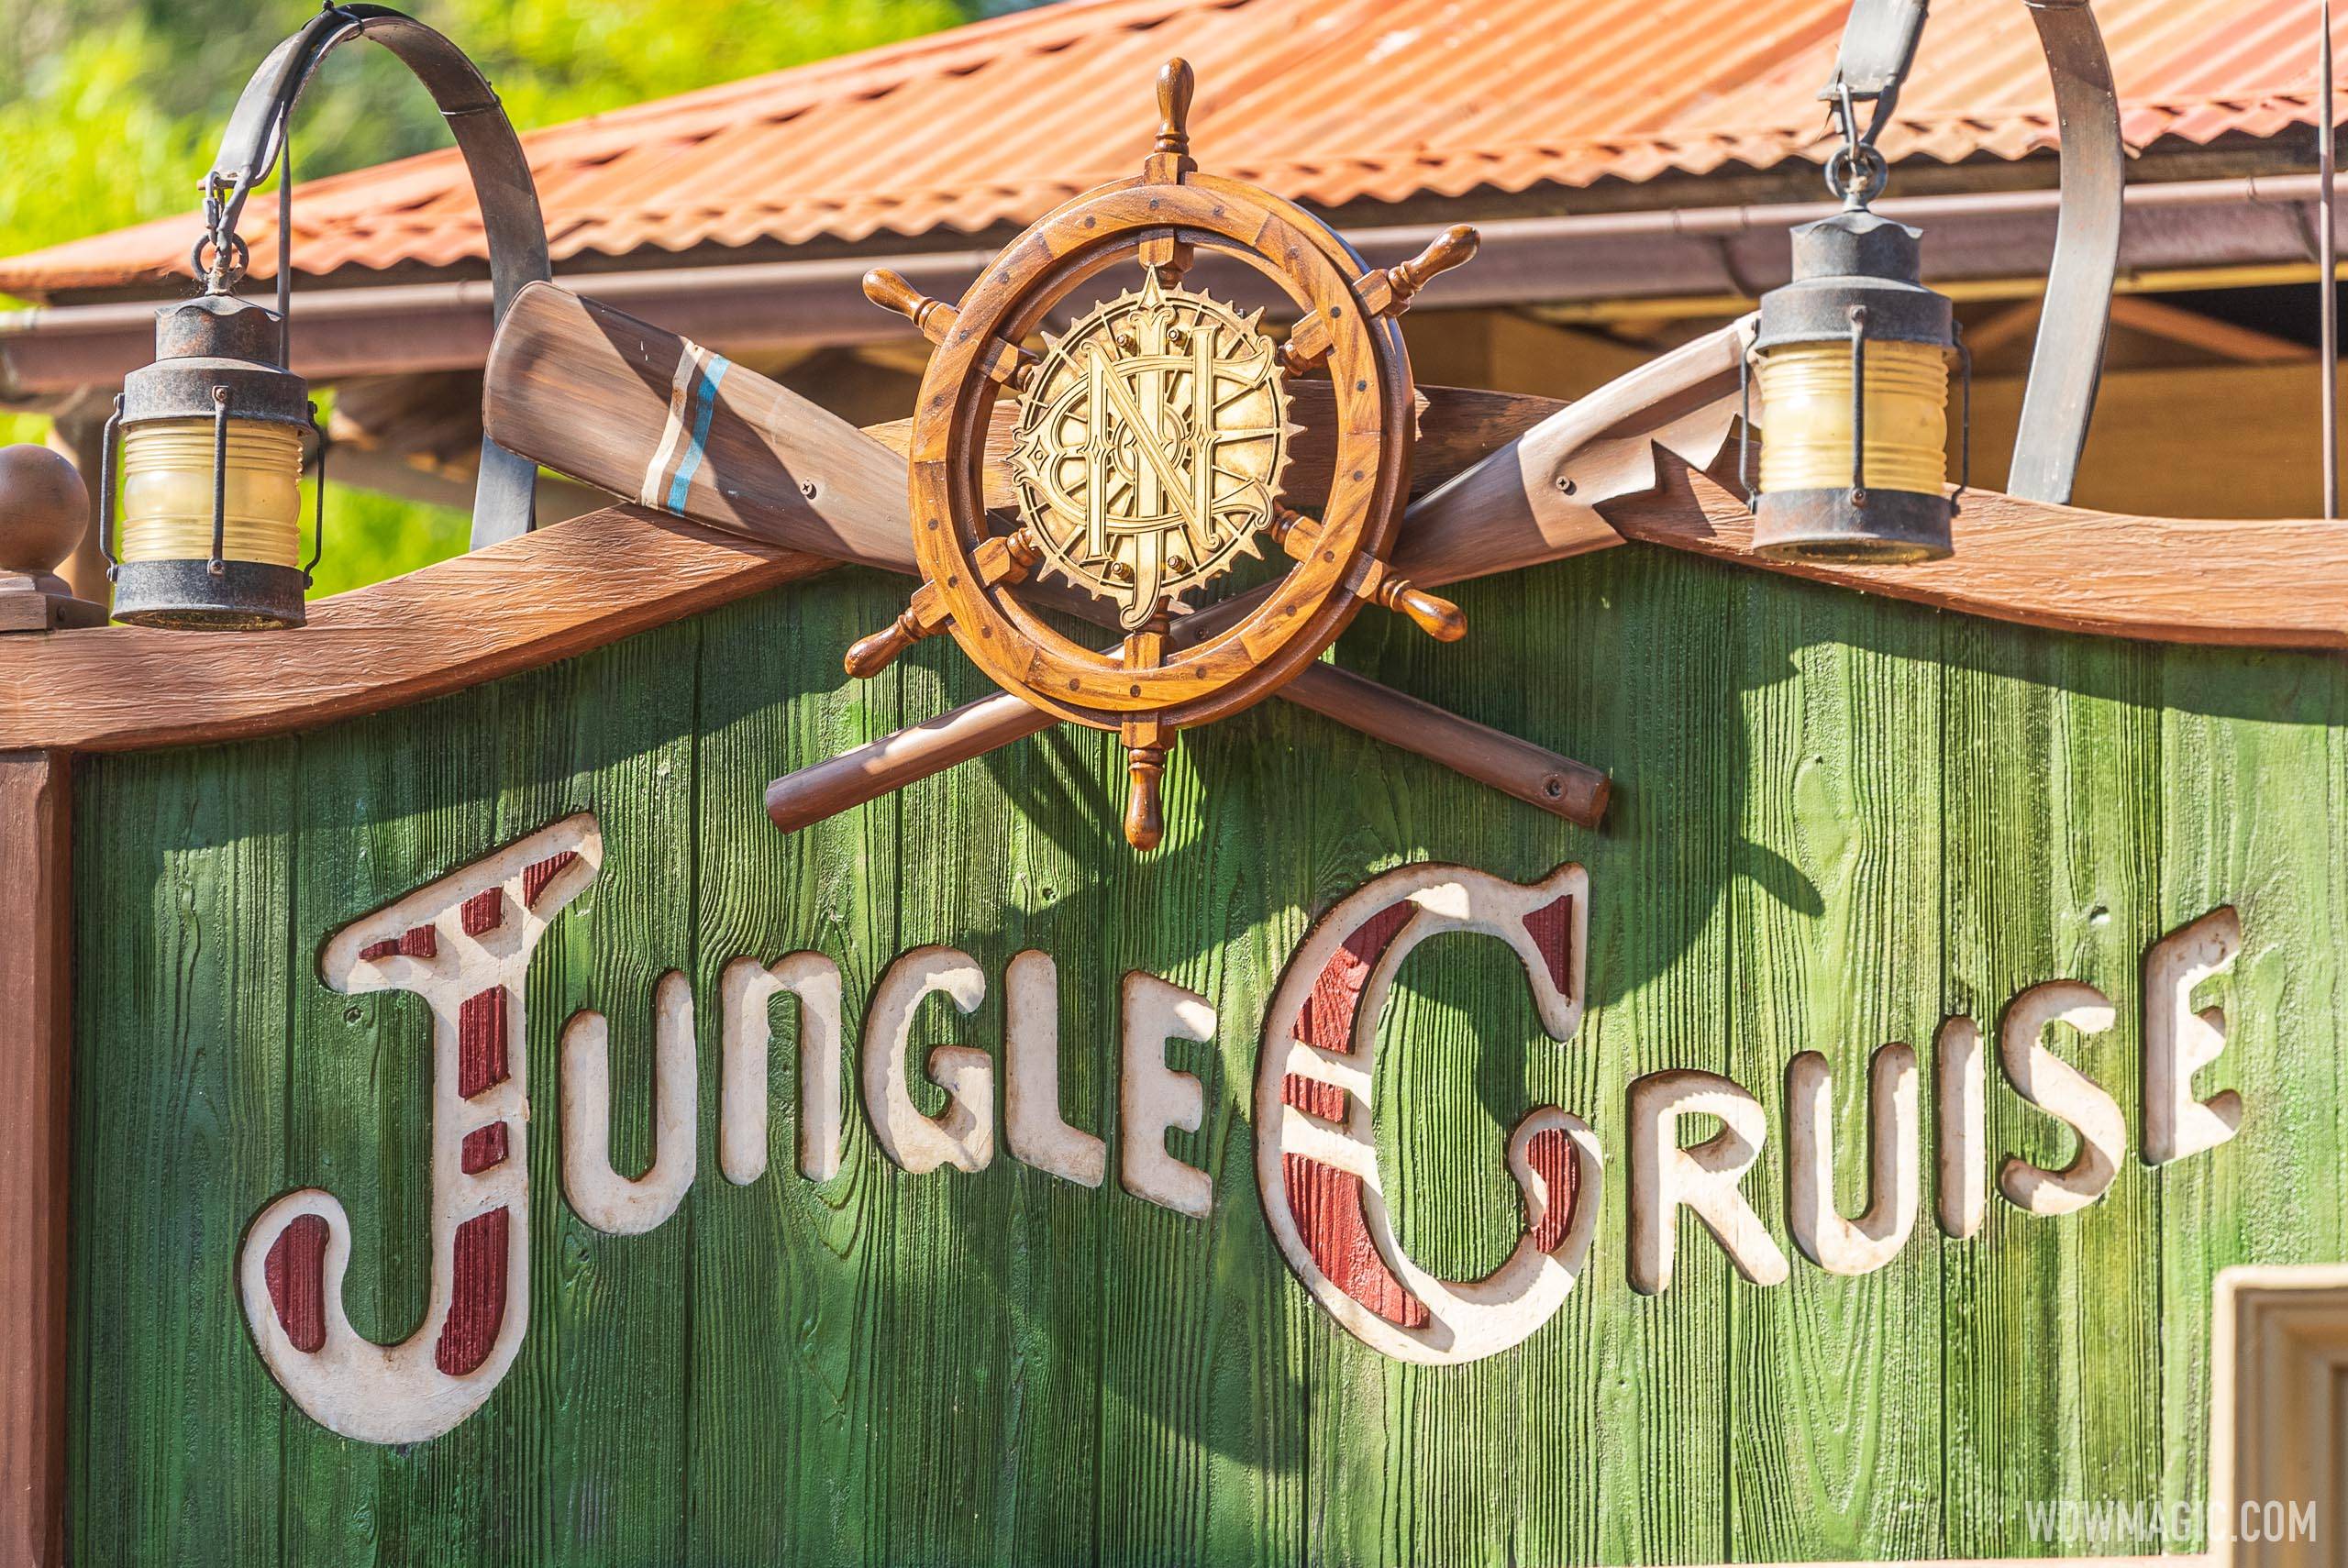 New sign at the Jungle Cruise replaces spears and masks with Jungle Navigation Co. logo